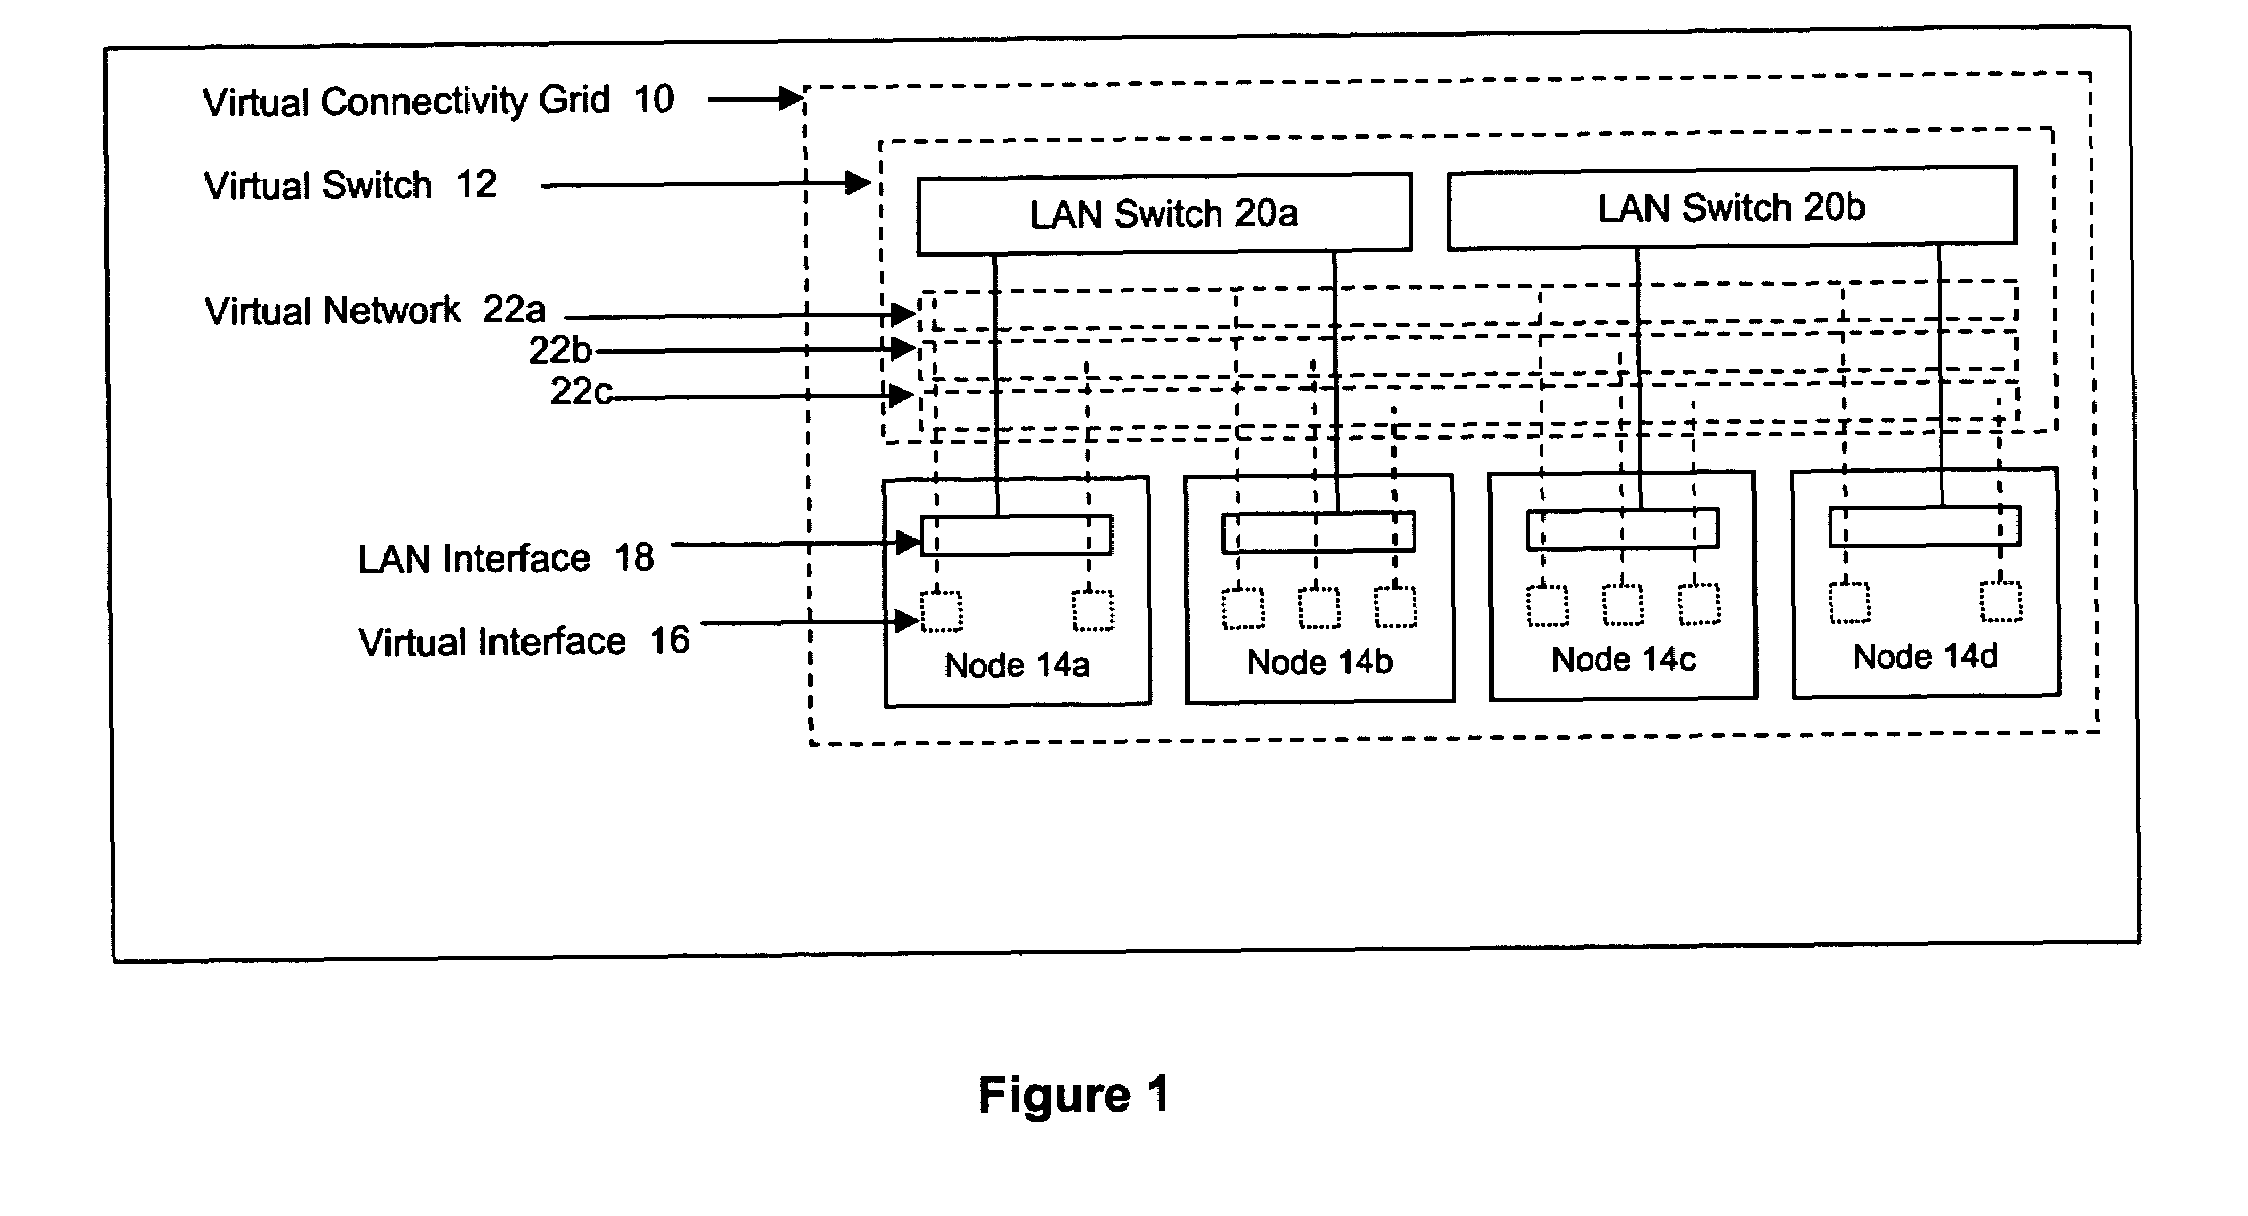 Method and apparatus for achieving dynamic capacity and high availability in multi-stage data networks using adaptive flow-based routing